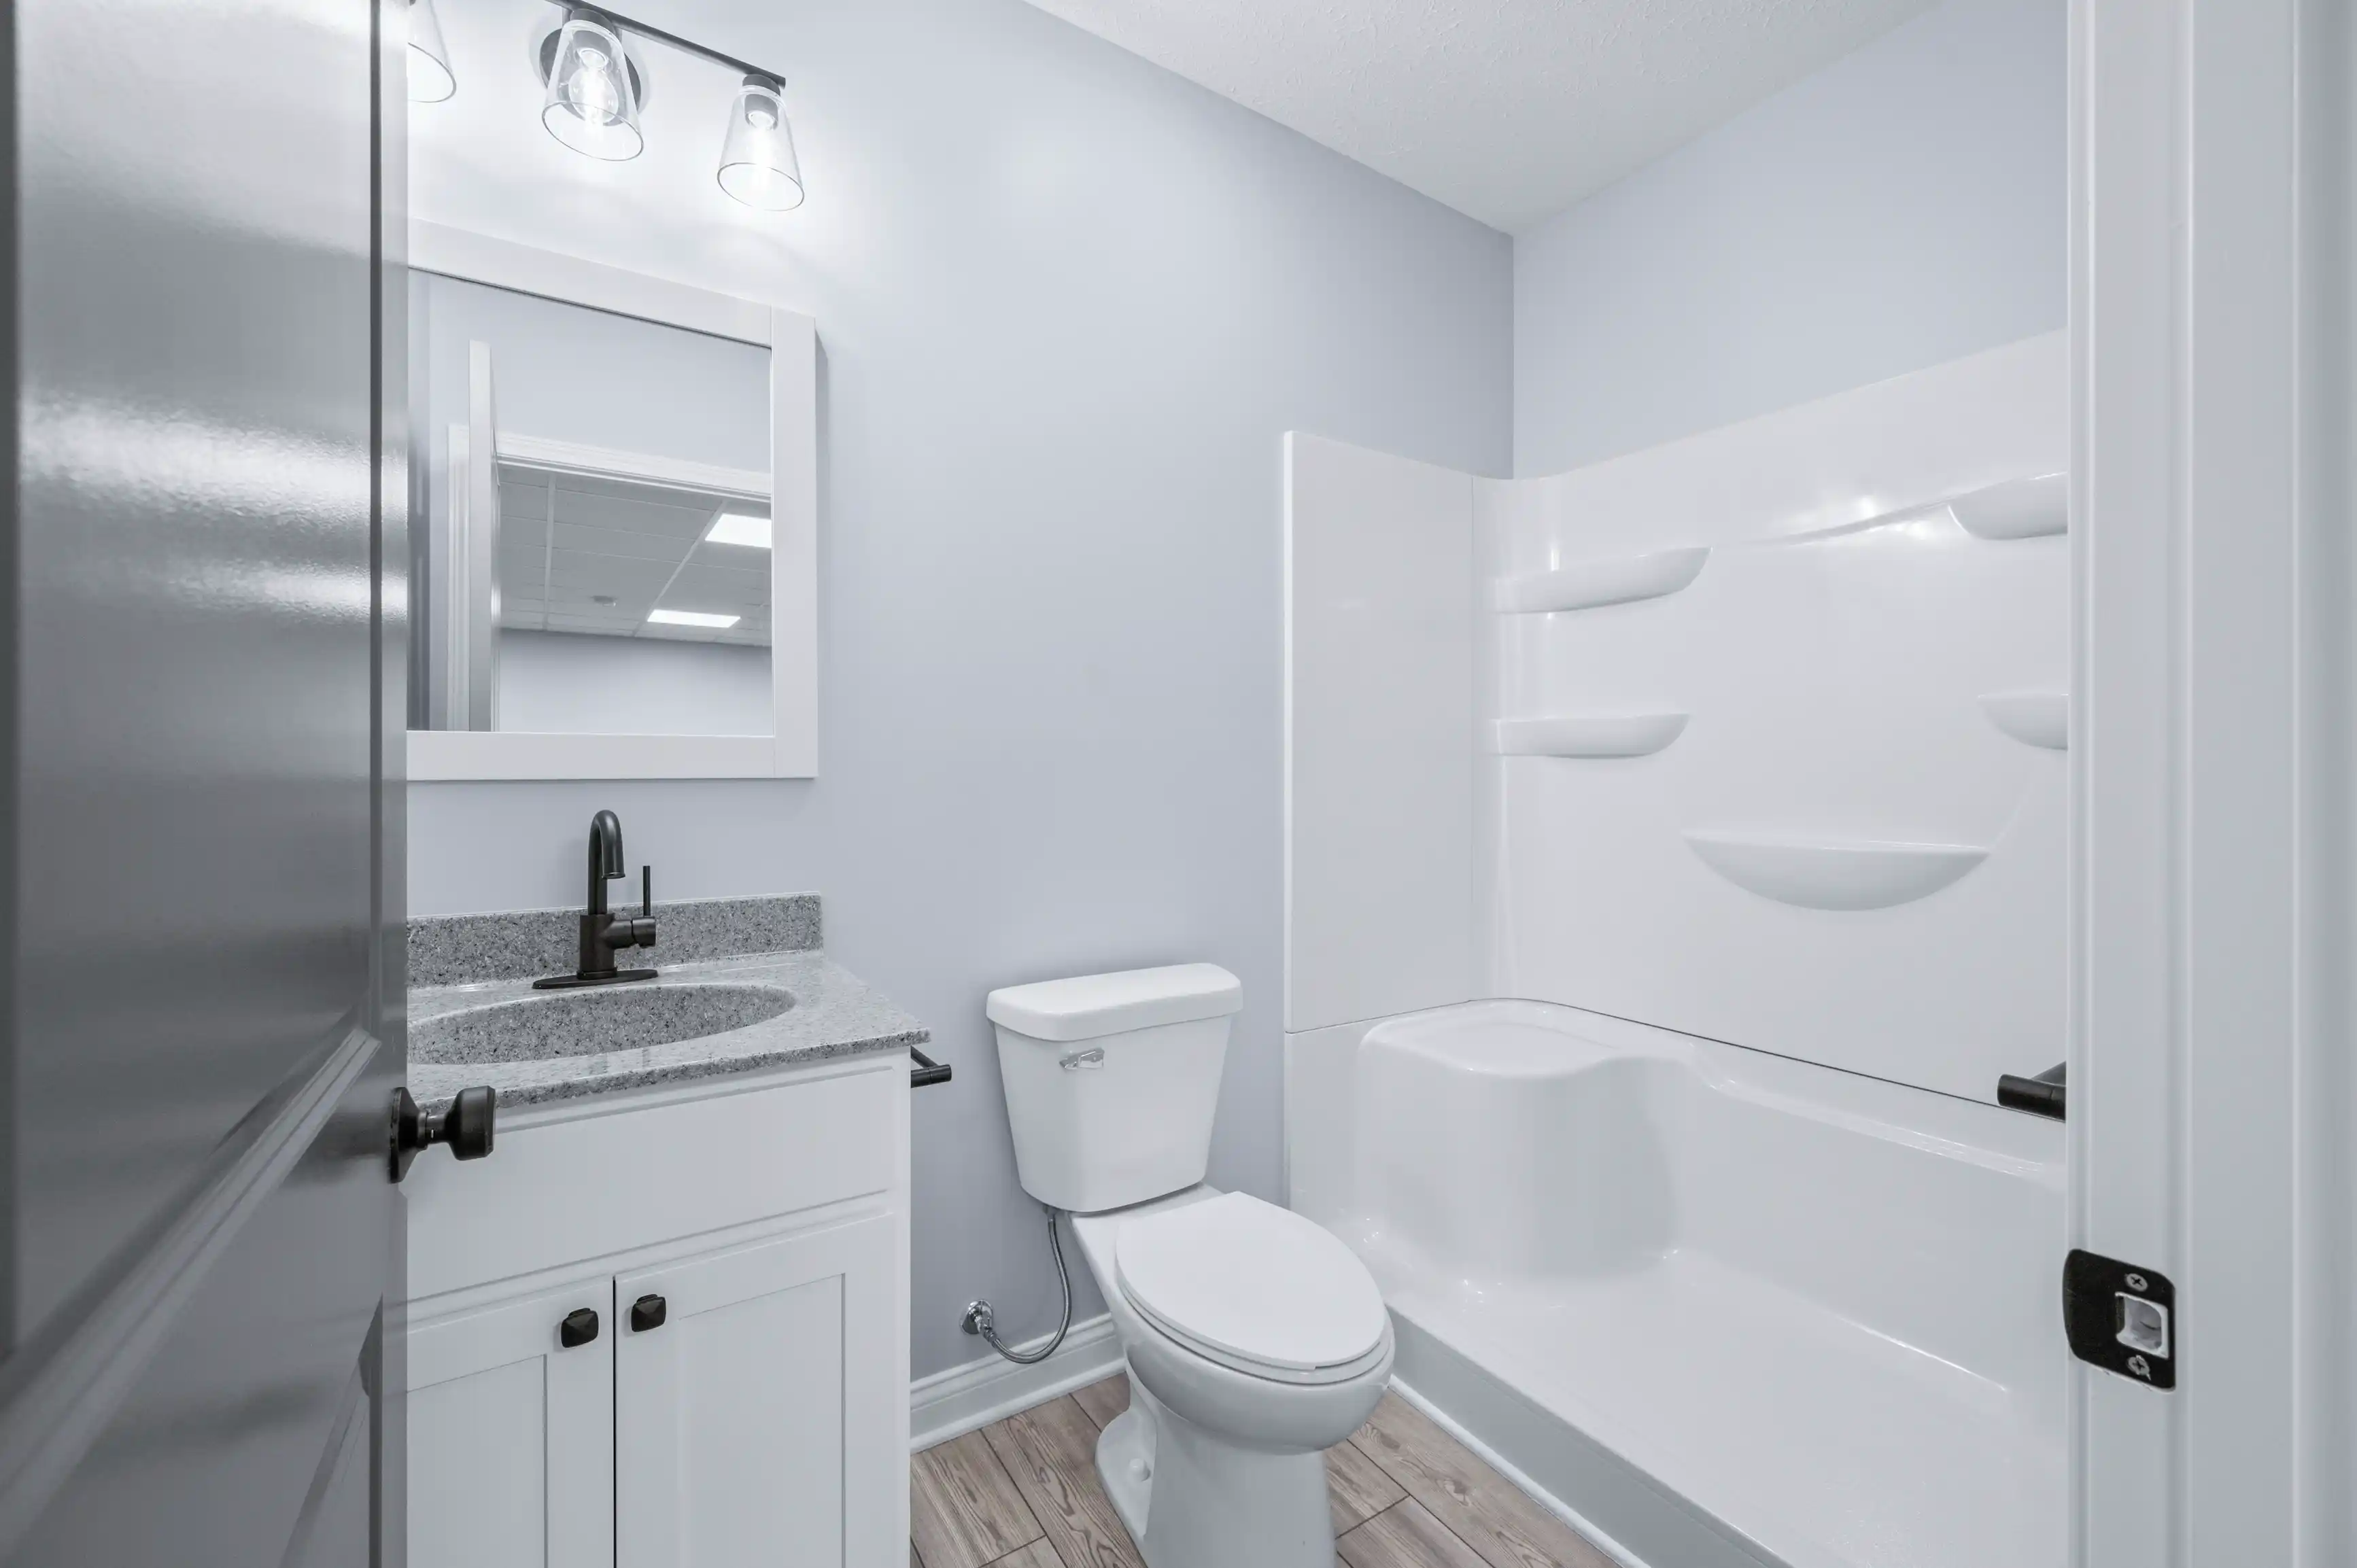 Modern bathroom interior with a white toilet, vanity cabinet with granite countertop and sink, a large mirror with overhead lights, and a built-in bathtub with shower area.